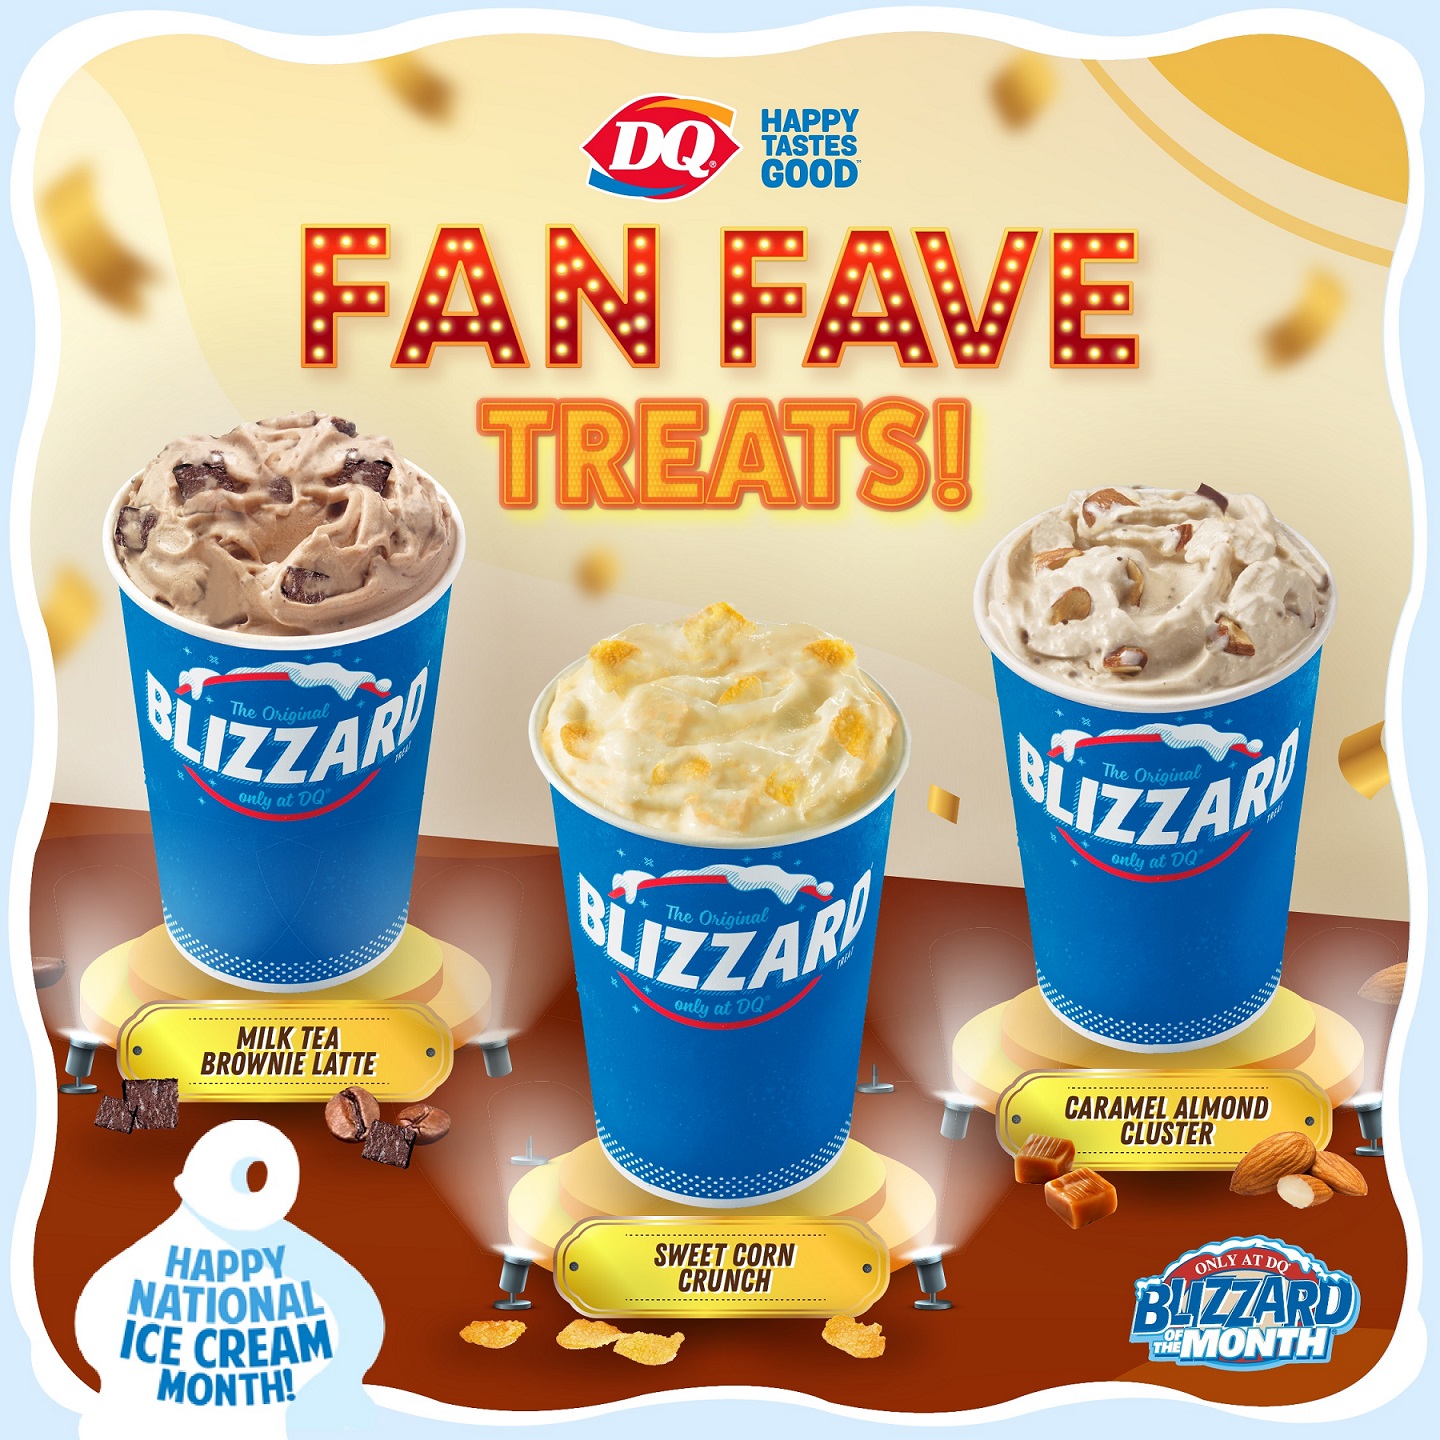 Celebrate National Ice Cream Month with a Blizzard of Promos with Dairy Queen